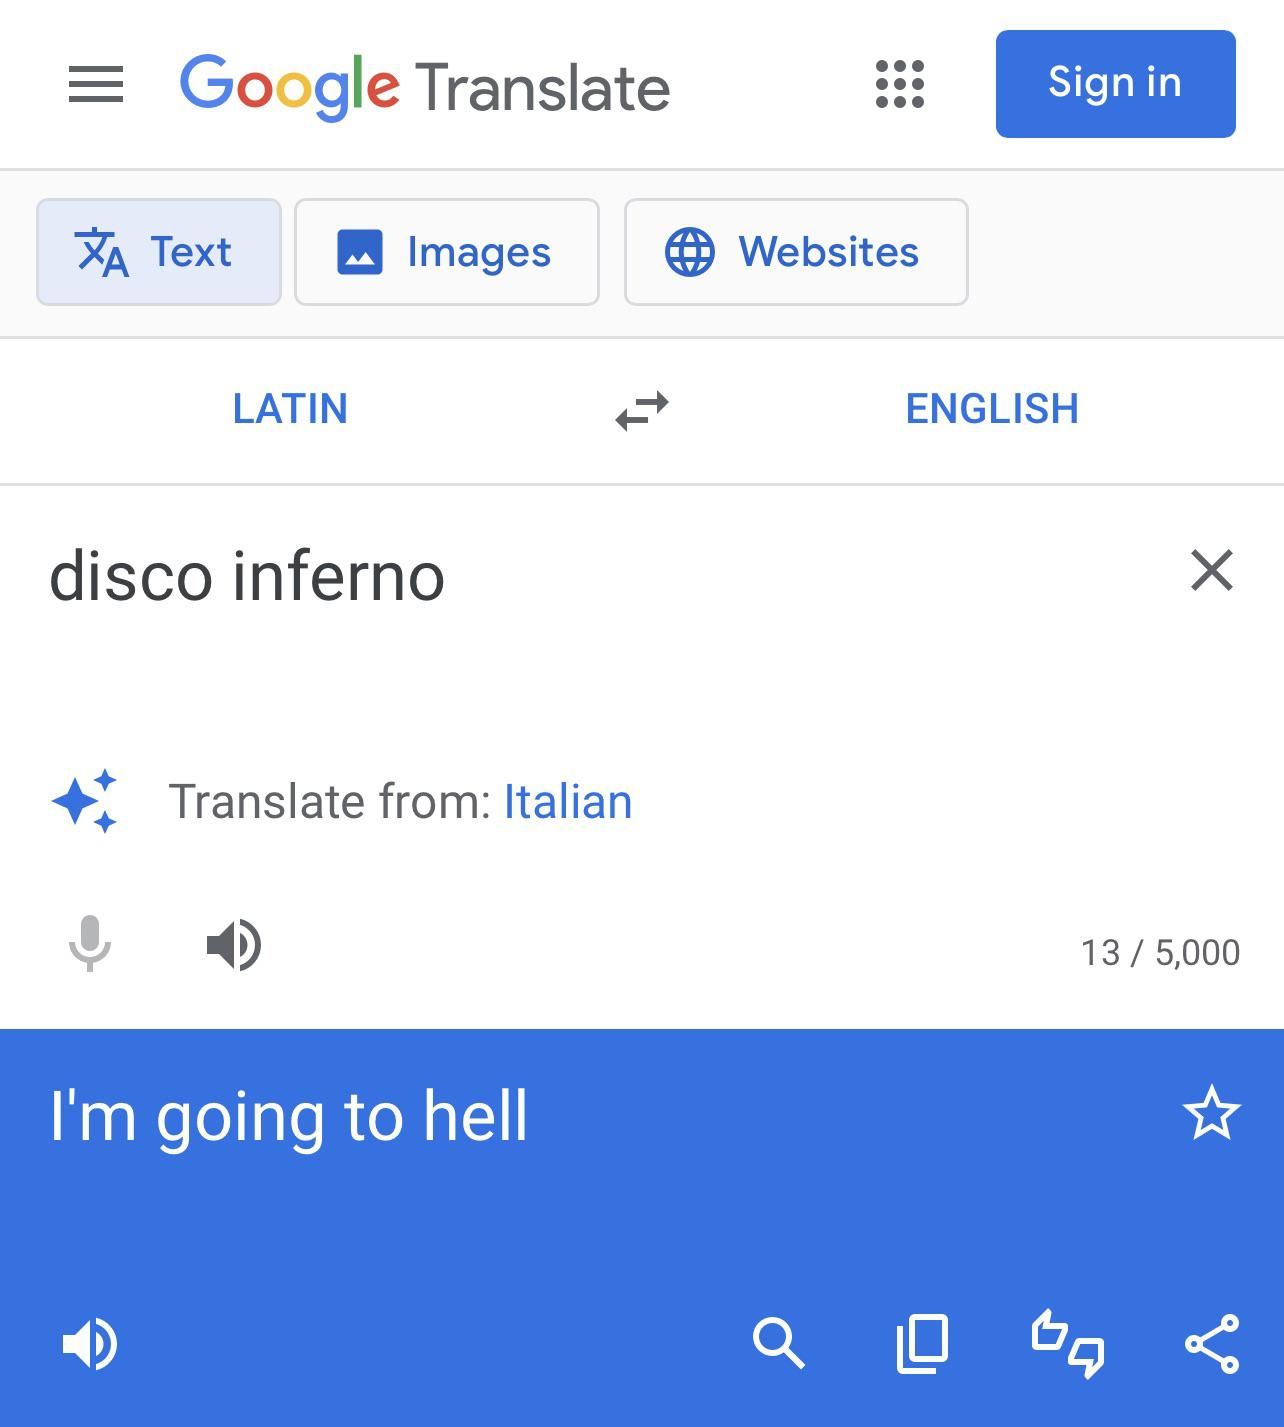 TIL ‘disco inferno’ is Latin for ‘I am going to hell’